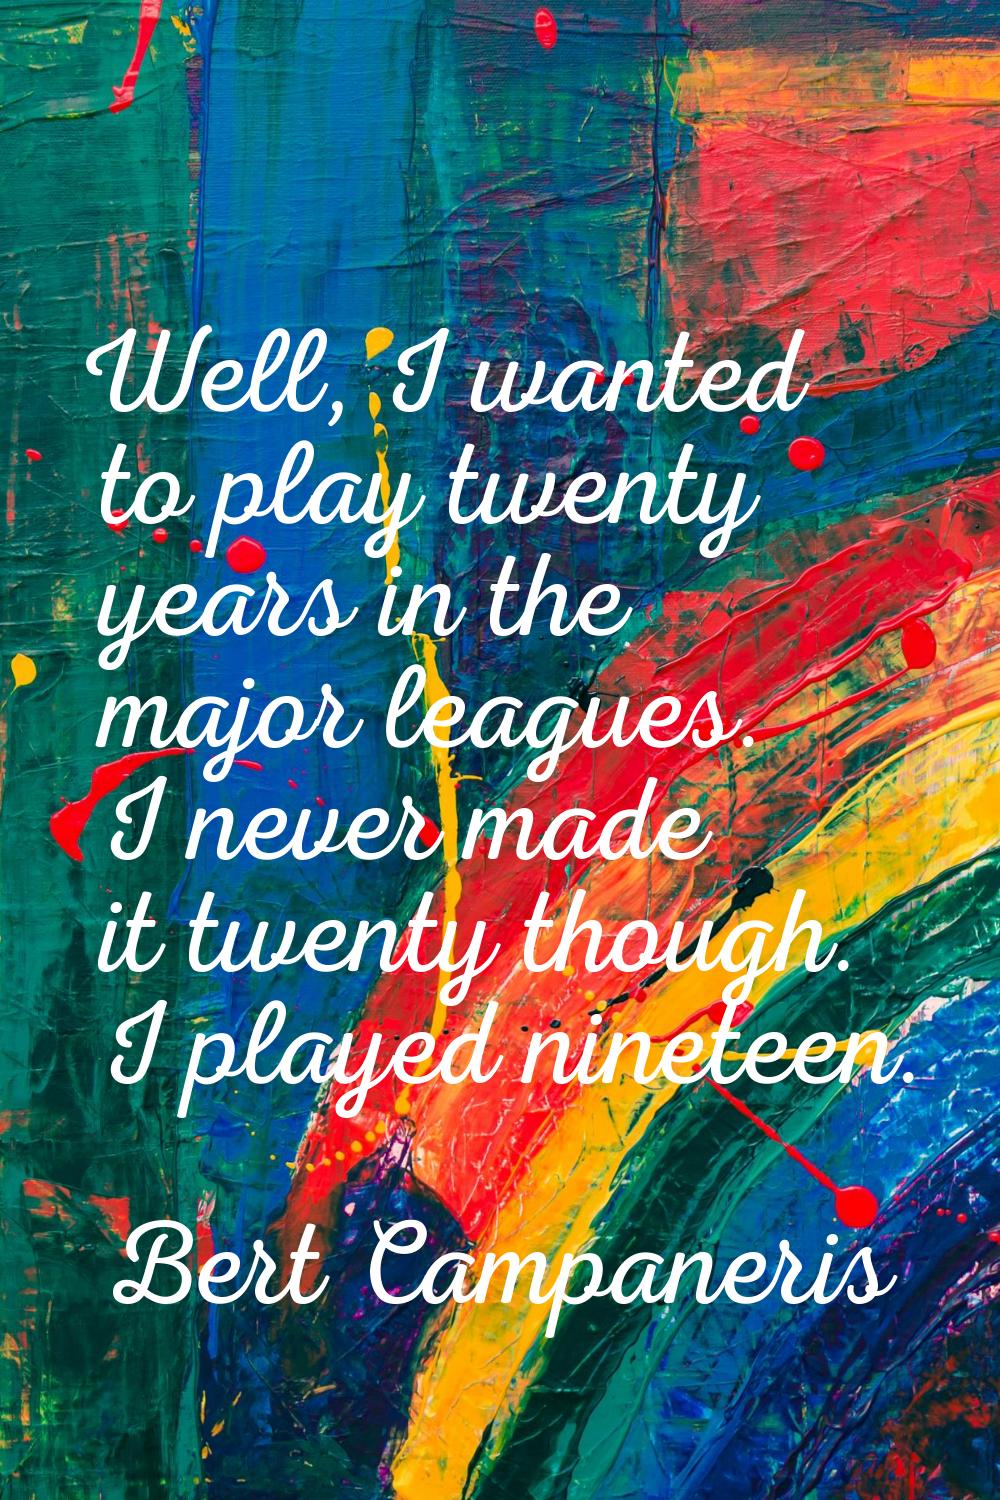 Well, I wanted to play twenty years in the major leagues. I never made it twenty though. I played n